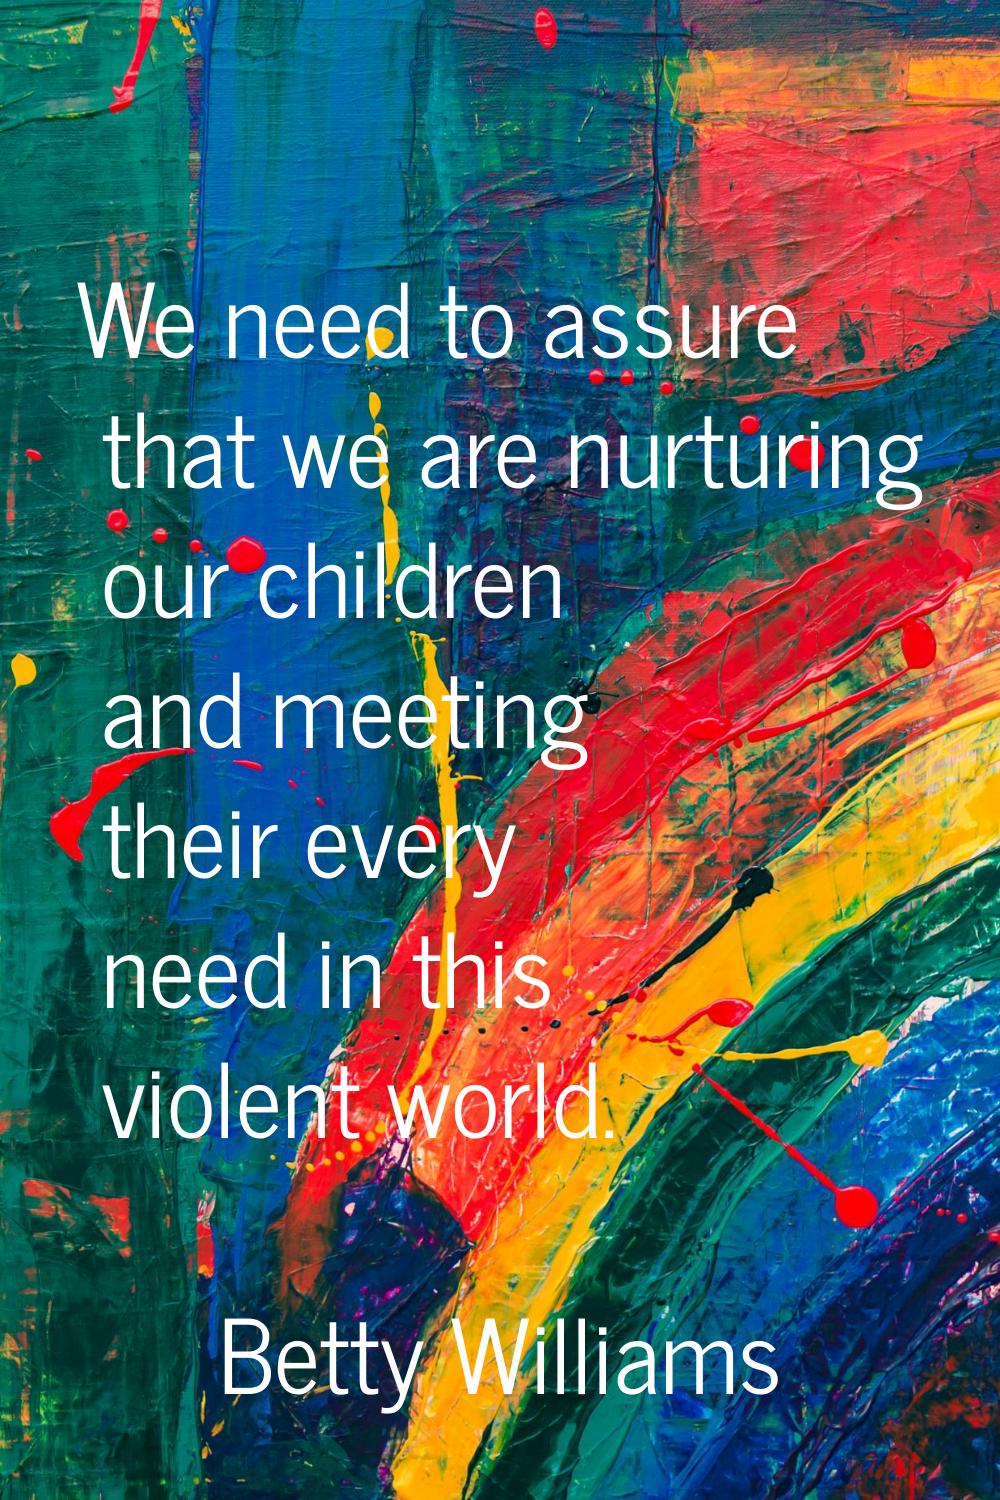 We need to assure that we are nurturing our children and meeting their every need in this violent w